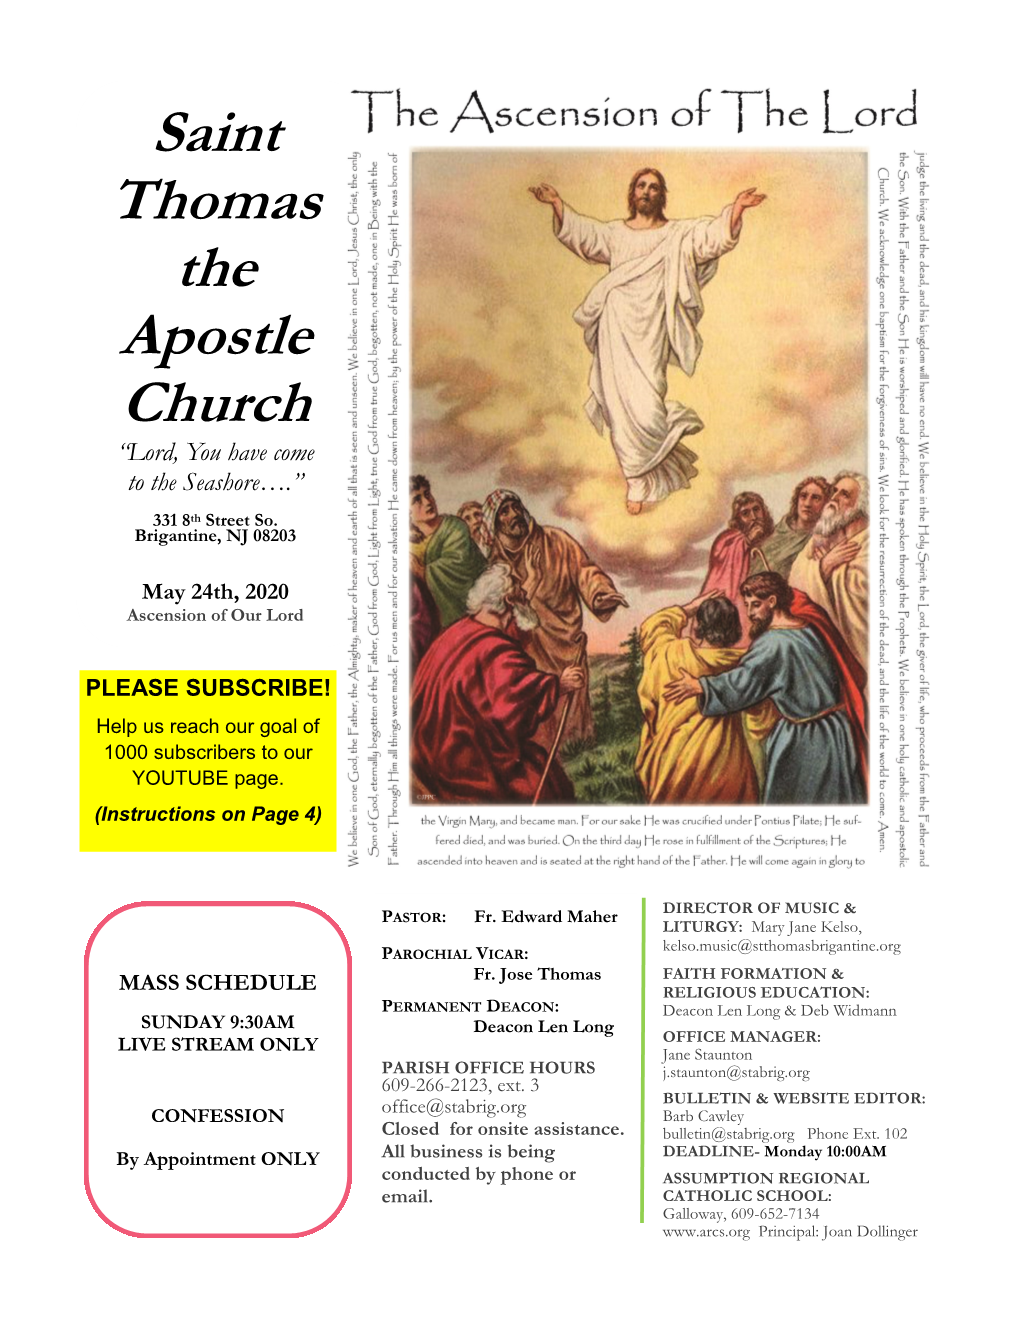 Saint Thomas the Apostle Church “Lord, You Have Come to the Seashore….”